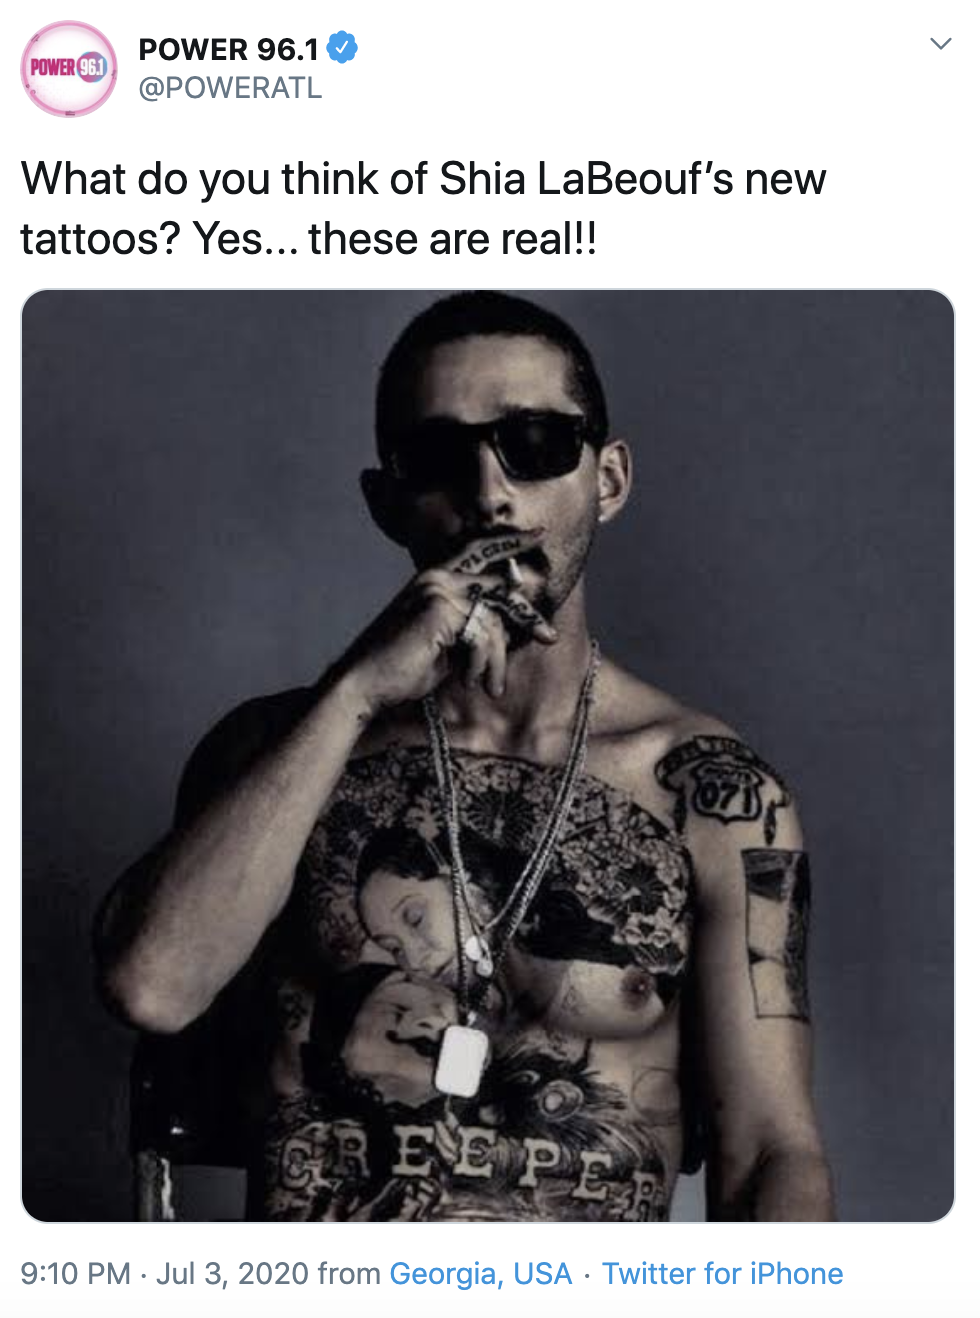 17 Meaningful Shia LaBeouf Tattoos that Are Real 2023 Latest Pics with  Designs  TattoosBoyGirl